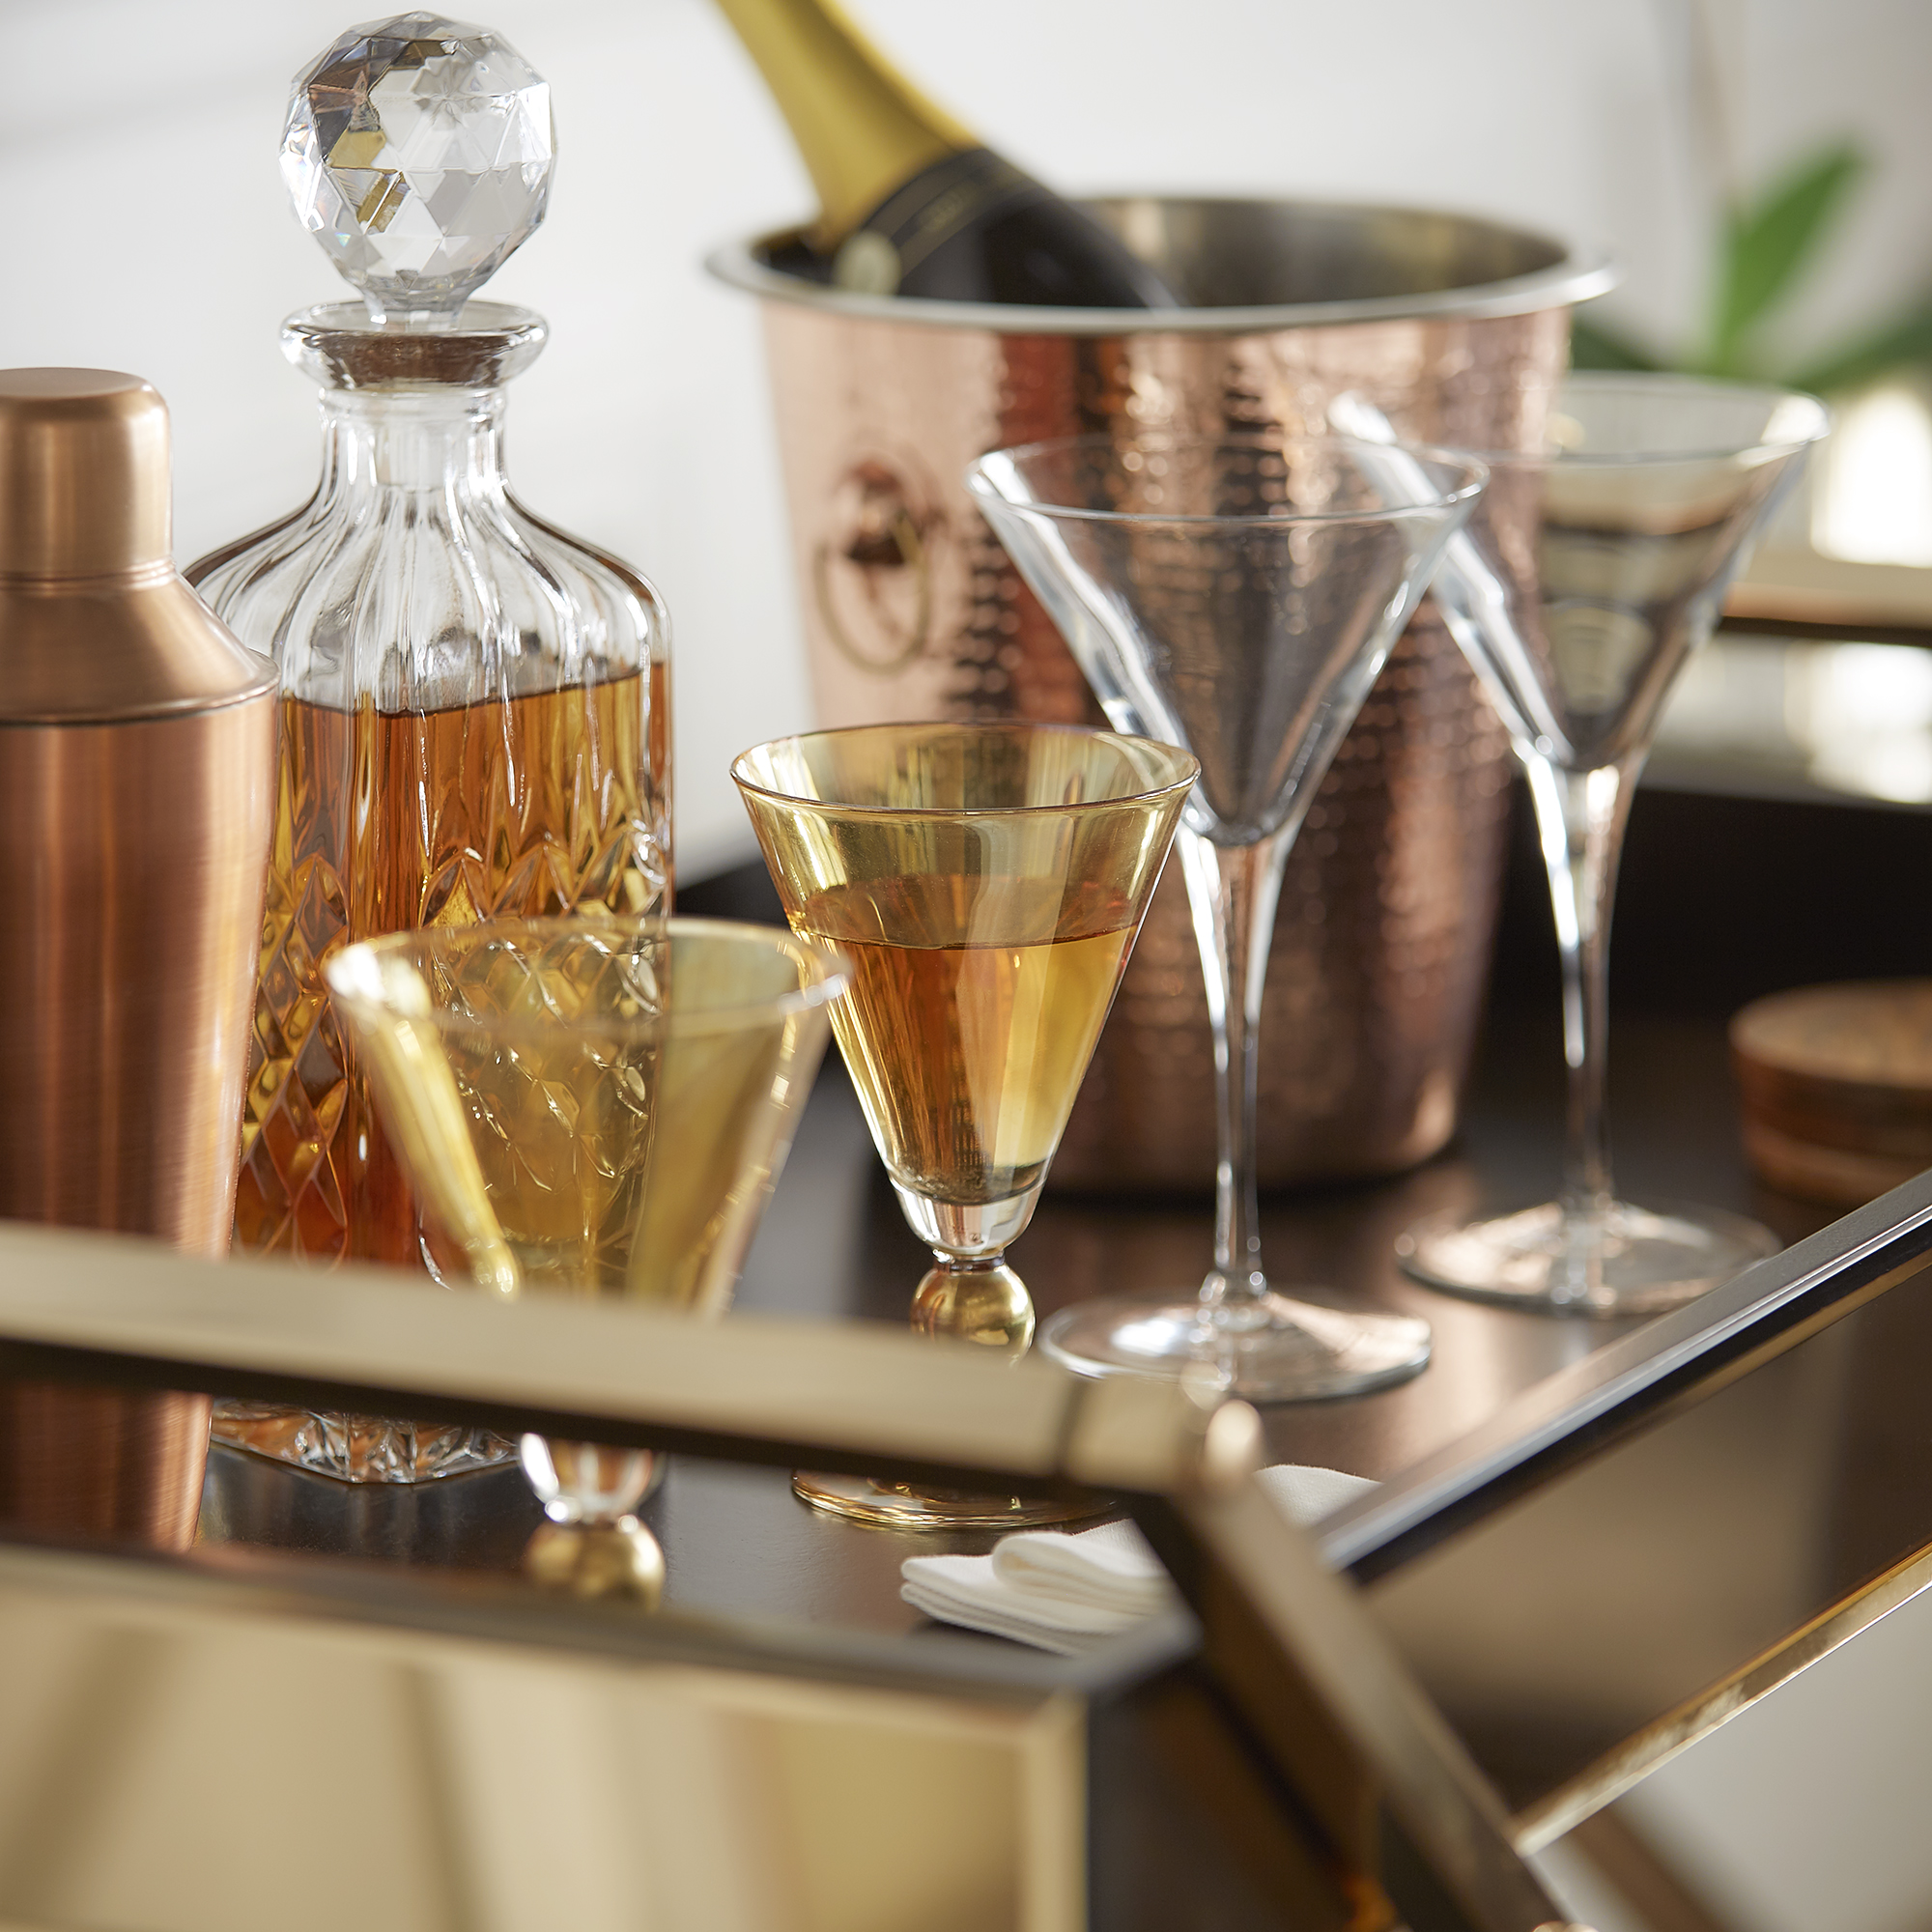 Another closeup view of another bar cart. This bar cart has a shiny champagne gold finish and has the top shelf decorated with gold, orange, and copper barware.